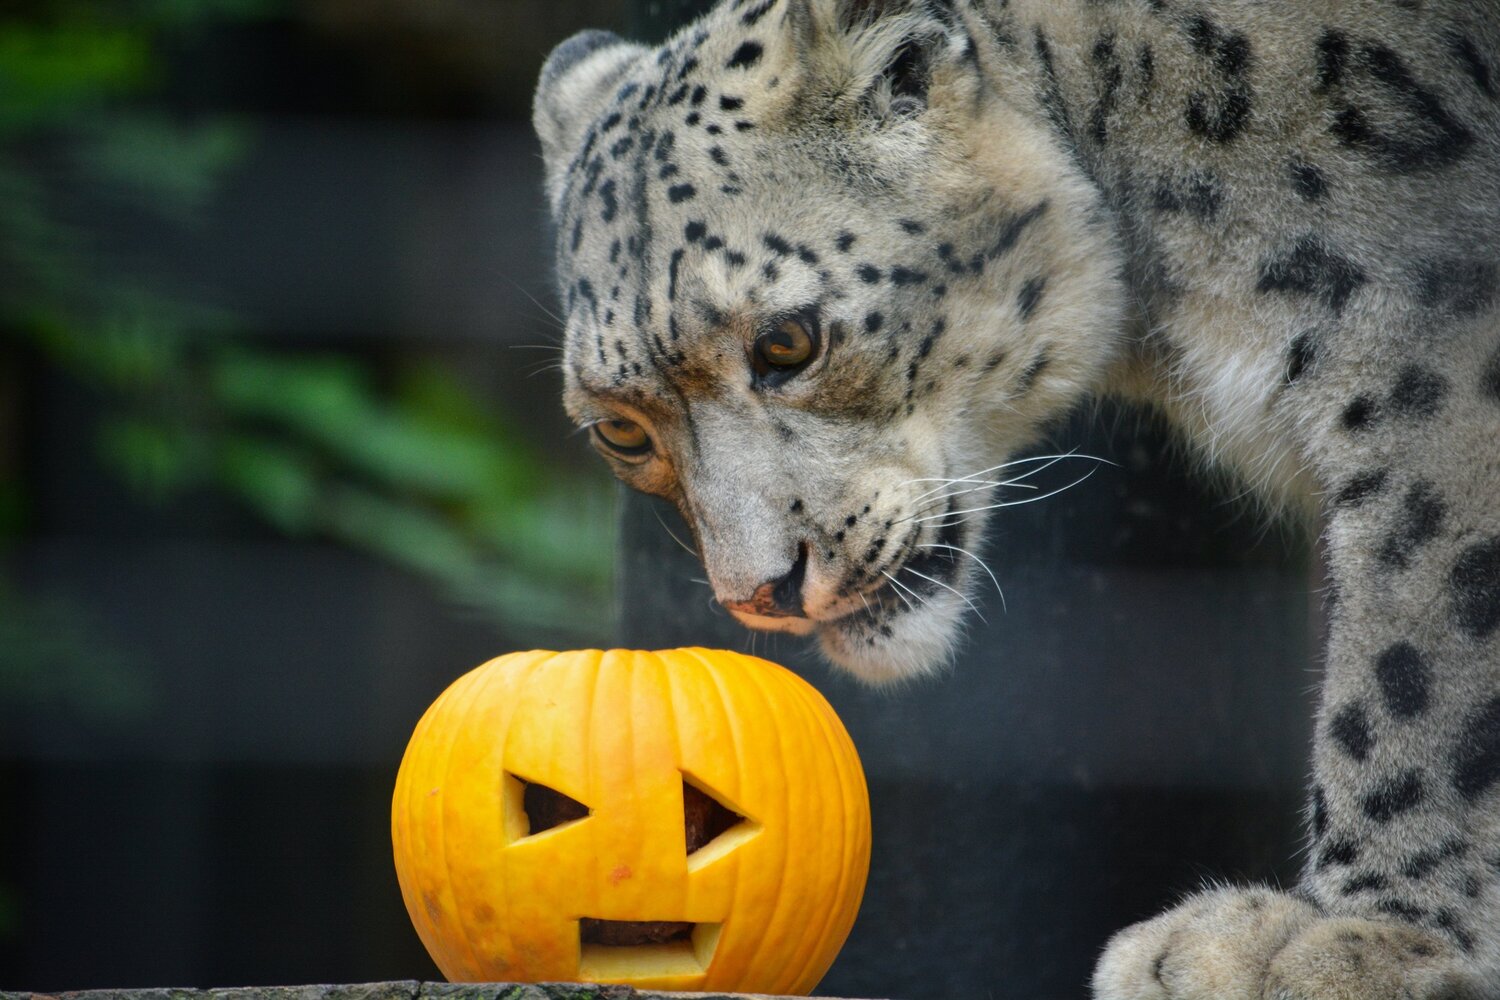 Potter Park Zoo’s Boo at the Zoo events run noon to 5 p.m. Saturdays and Sundays through Oct. 29.